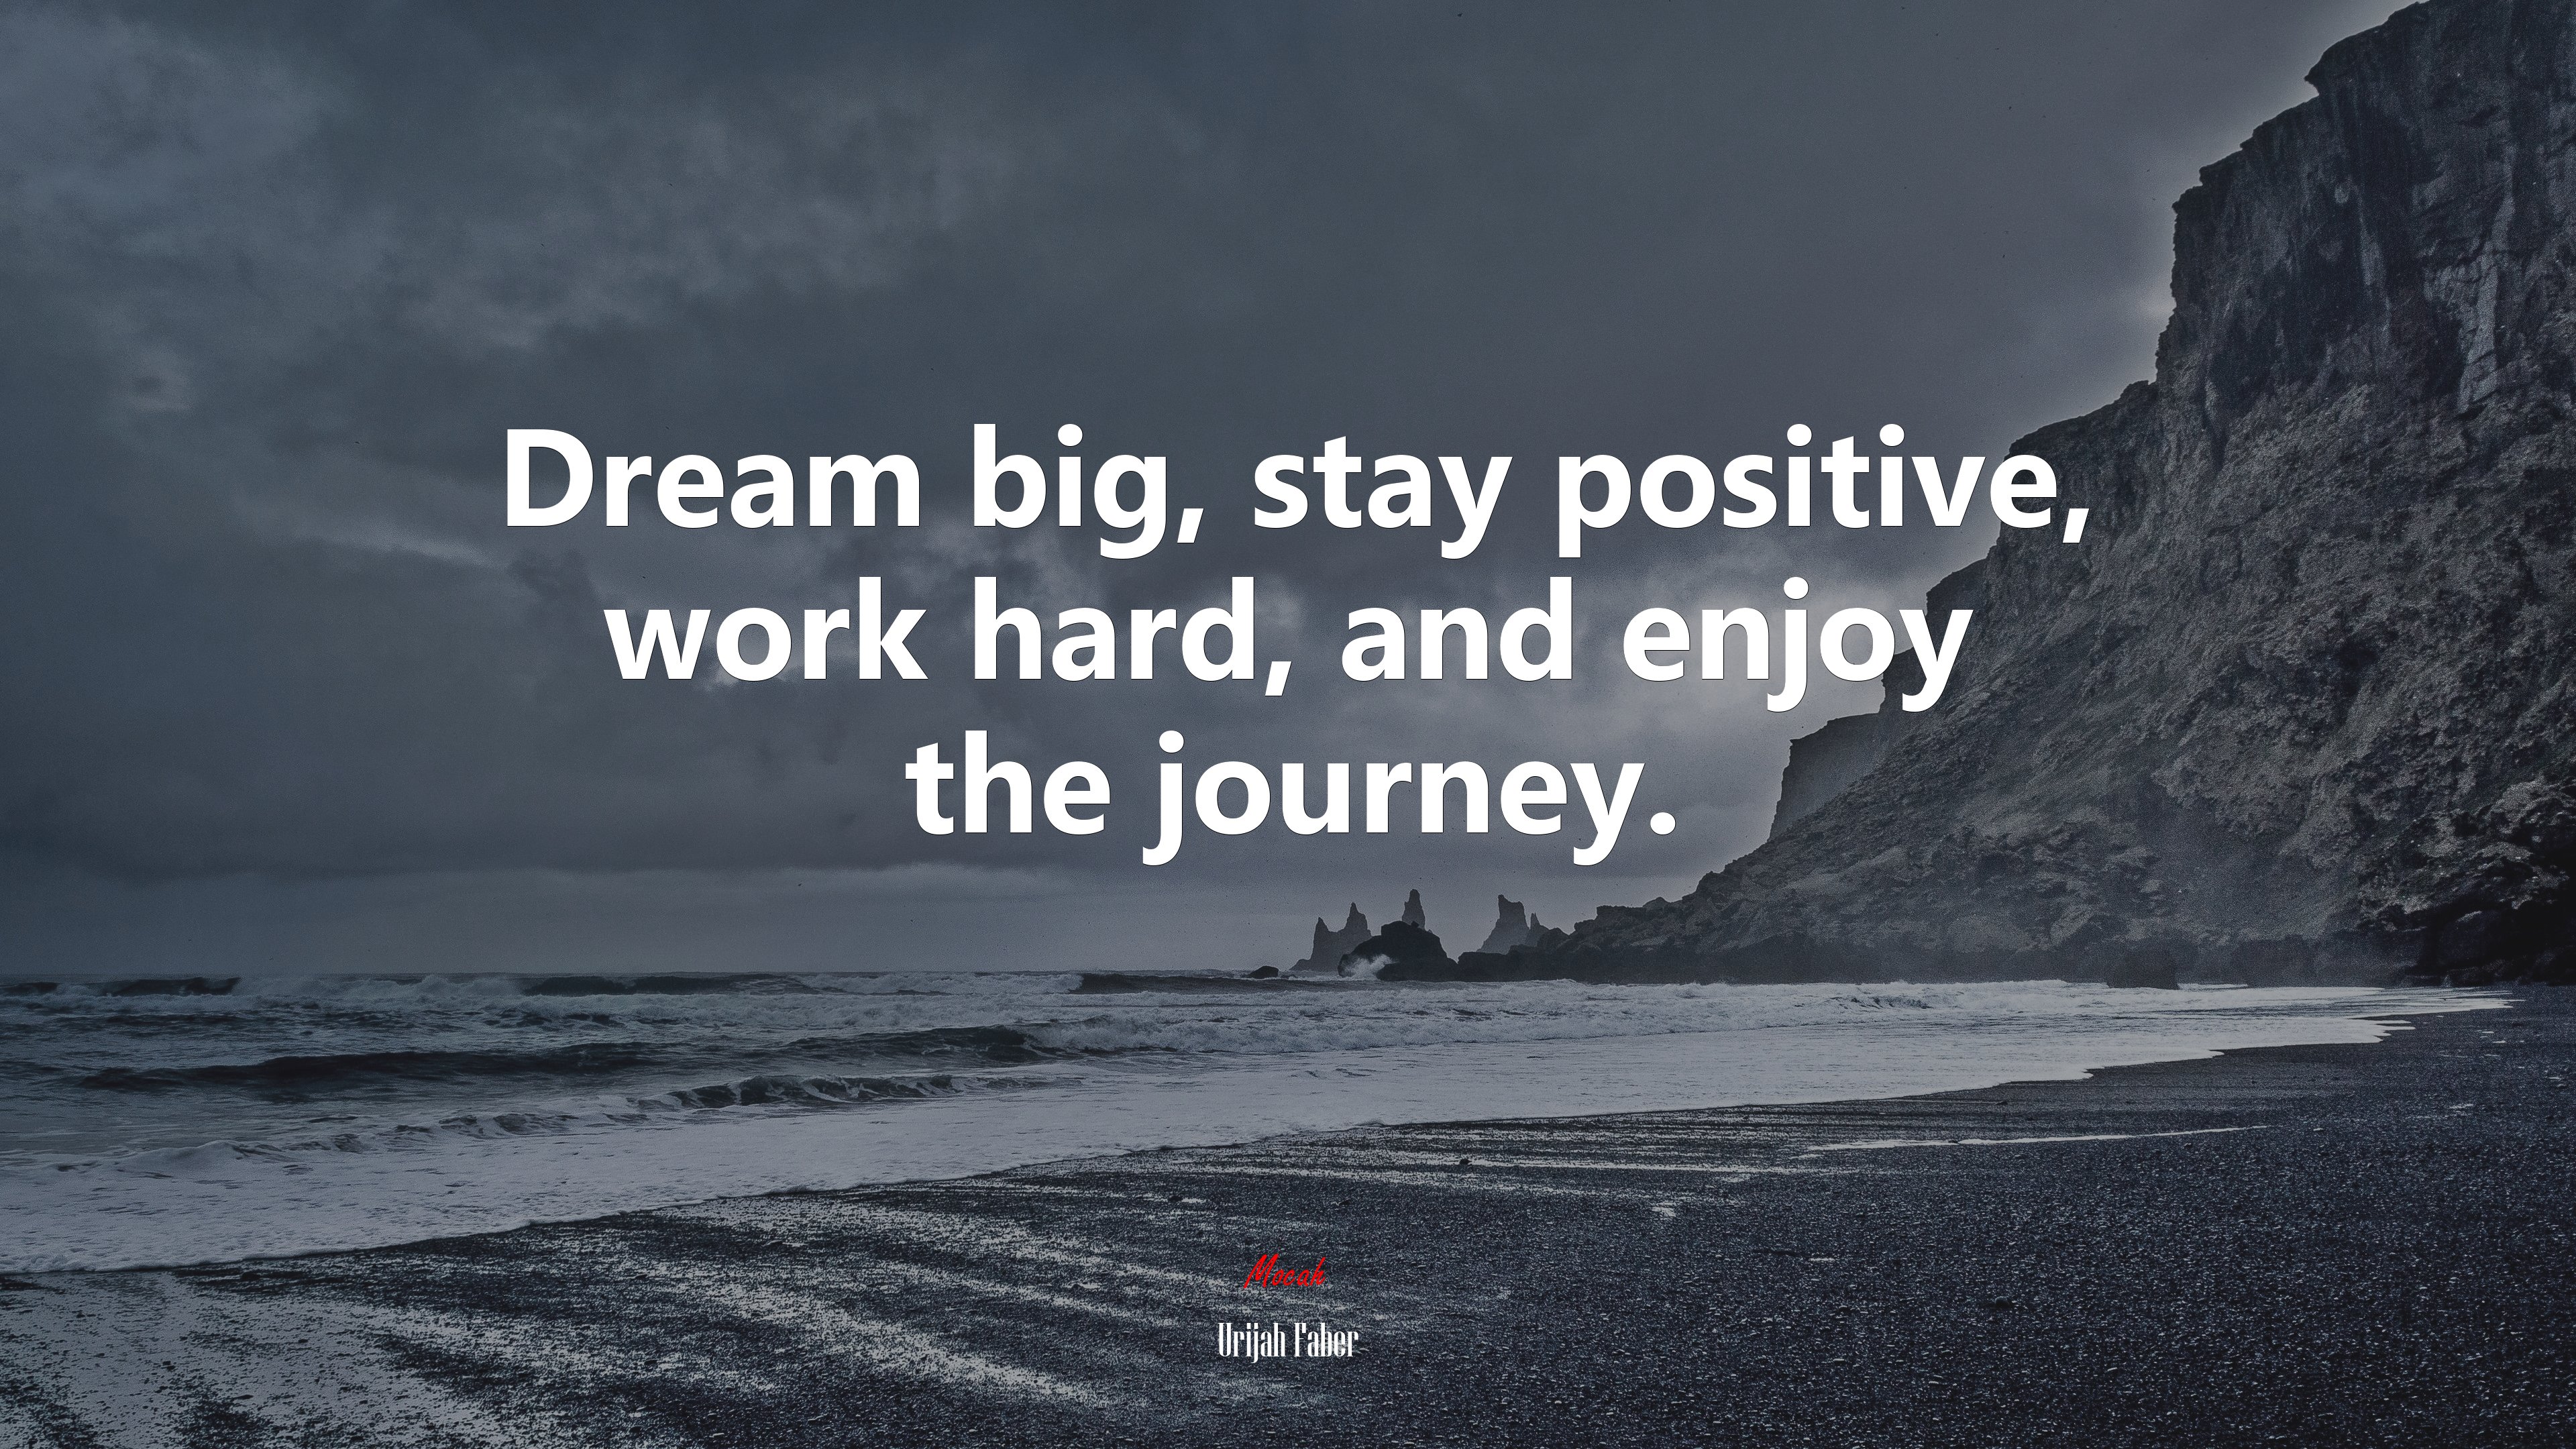 Dream big, stay positive, work hard, and enjoy the journey. Urijah Faber quote Gallery HD Wallpaper